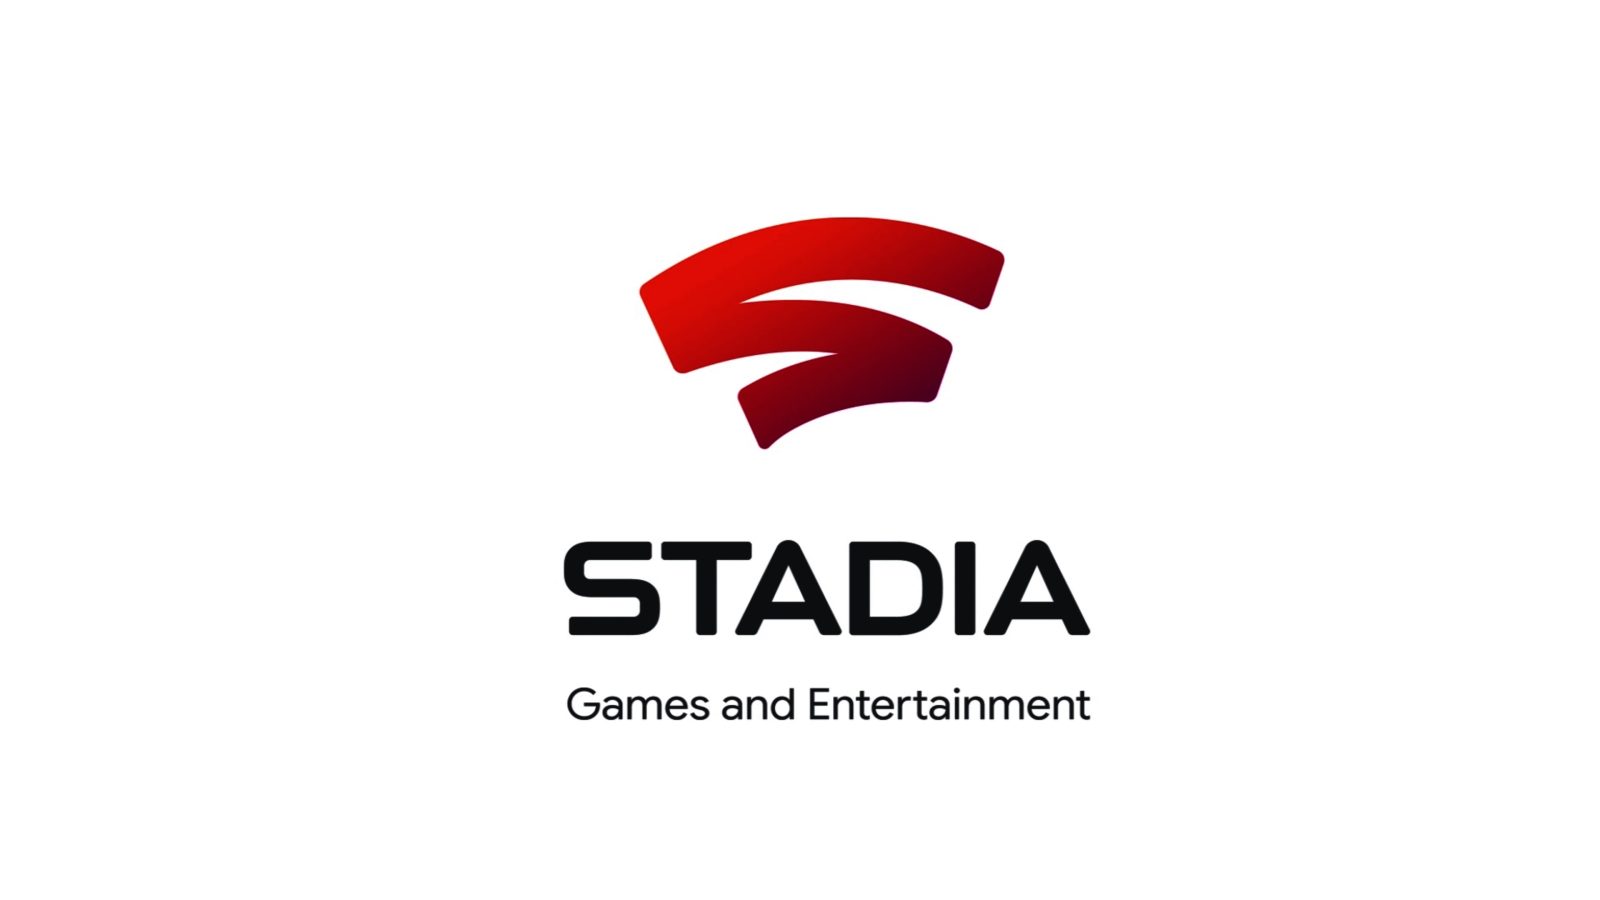 Stadia Games and Entertainment